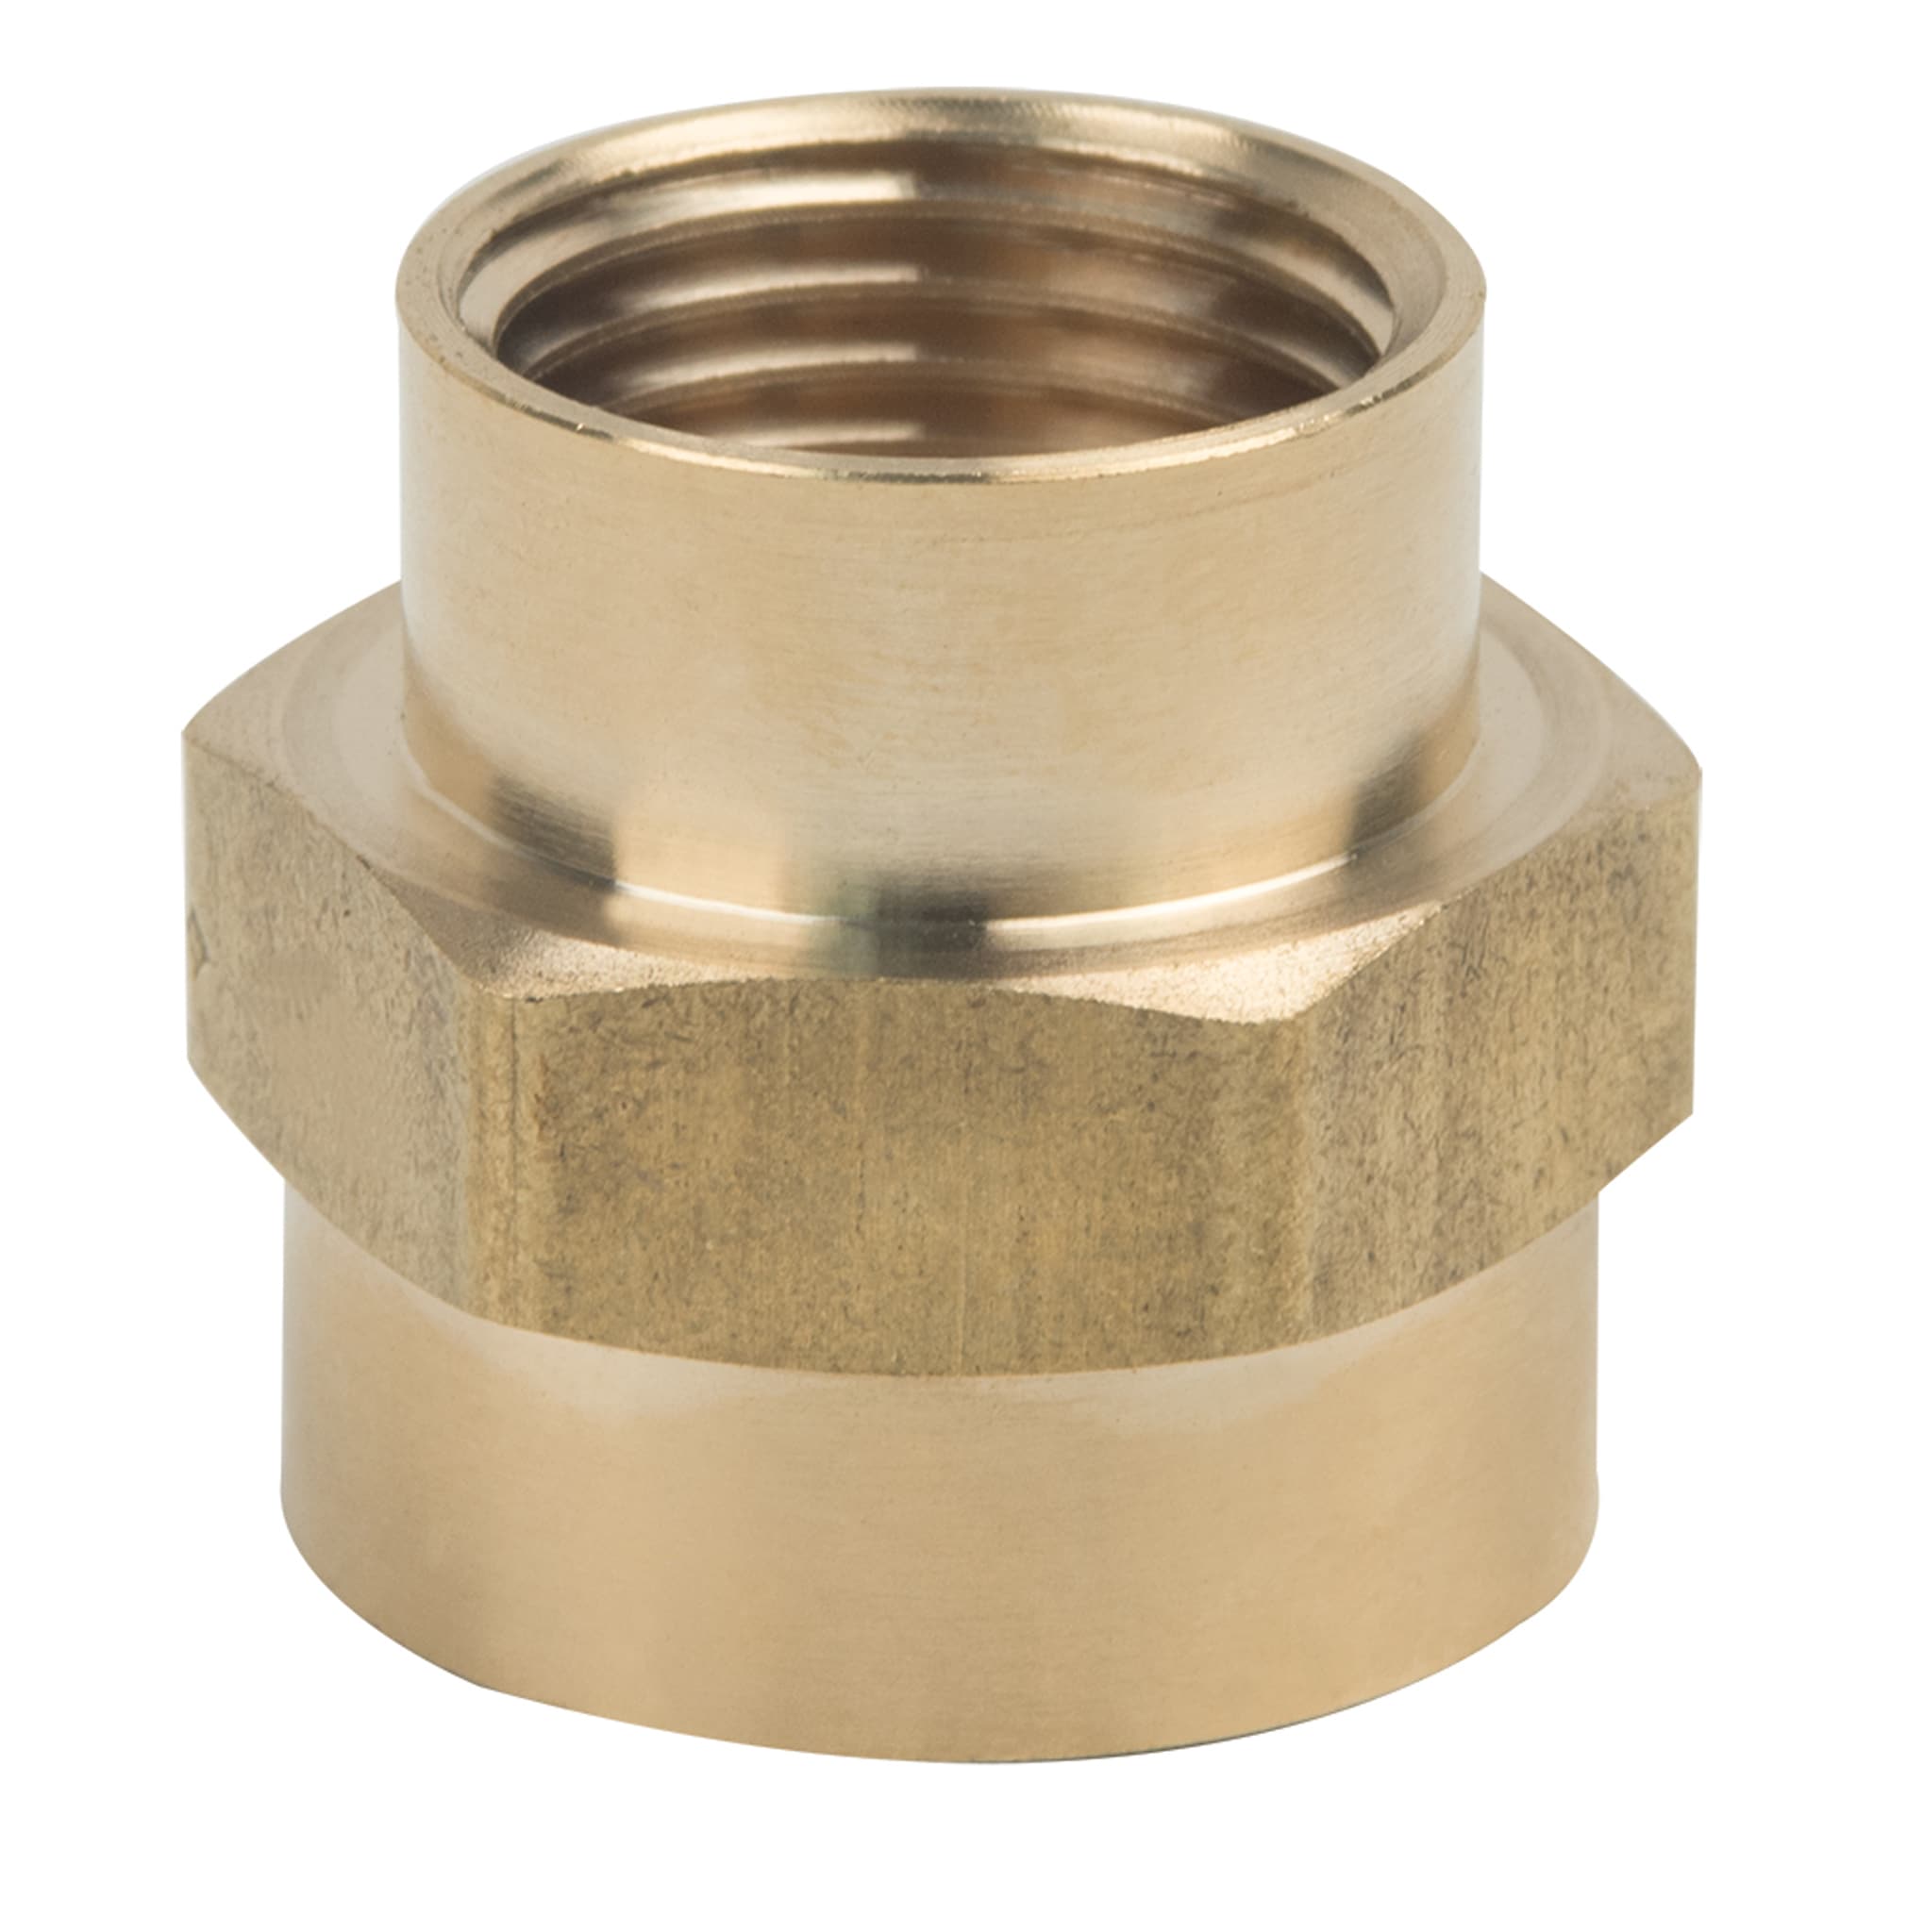 Brasscraft 3 4 In X 1 2 In Dia Threaded Reducing Union Coupling Fitting In The Brass Fittings Department At Lowes Com